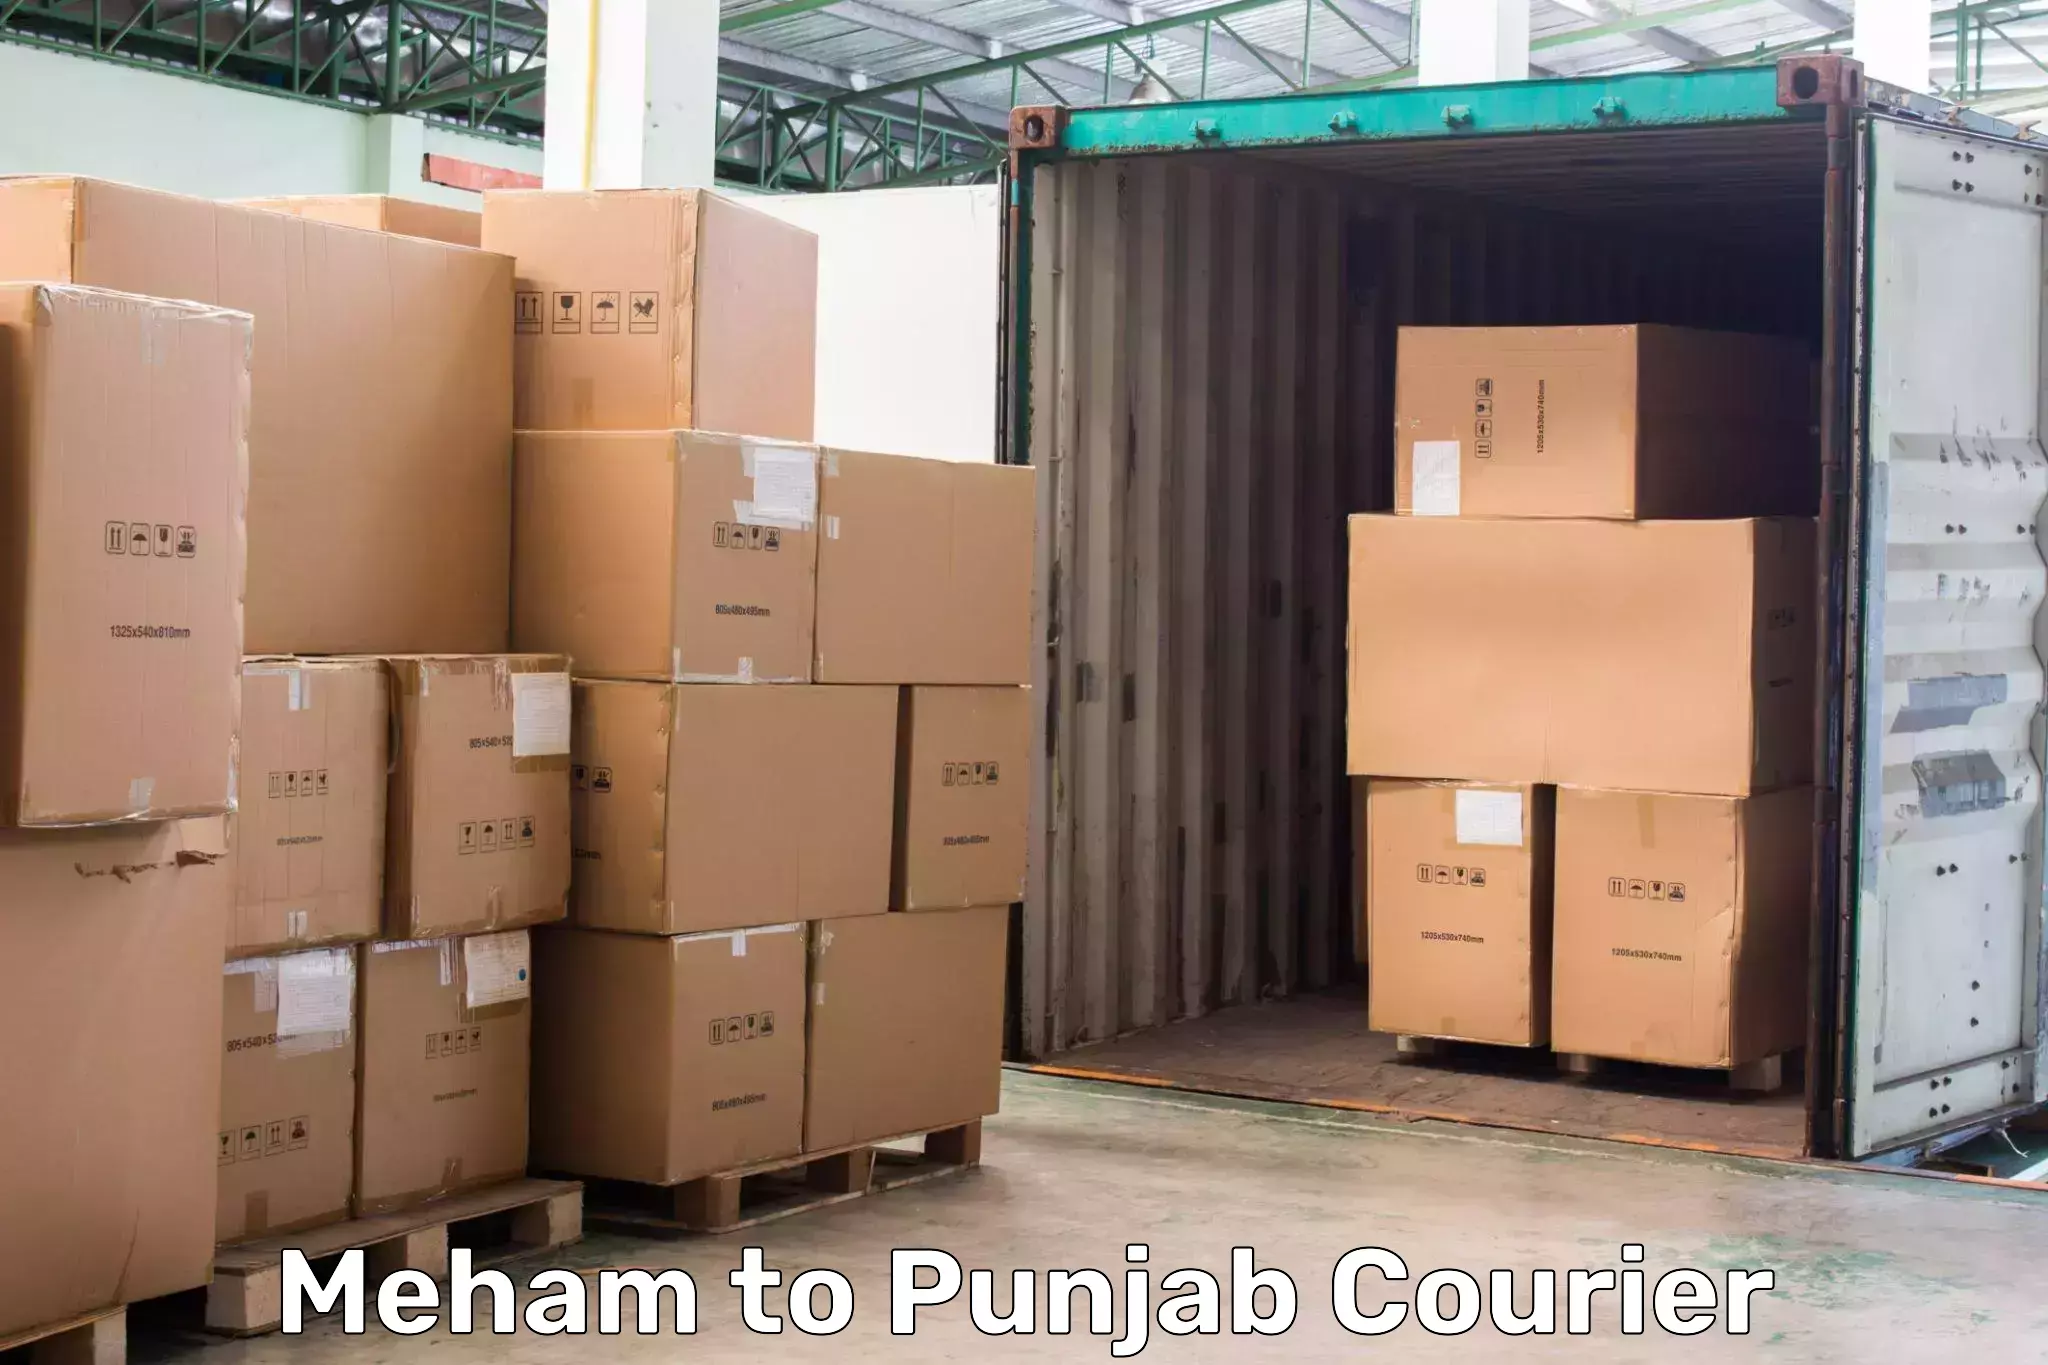 Express courier capabilities Meham to Punjab